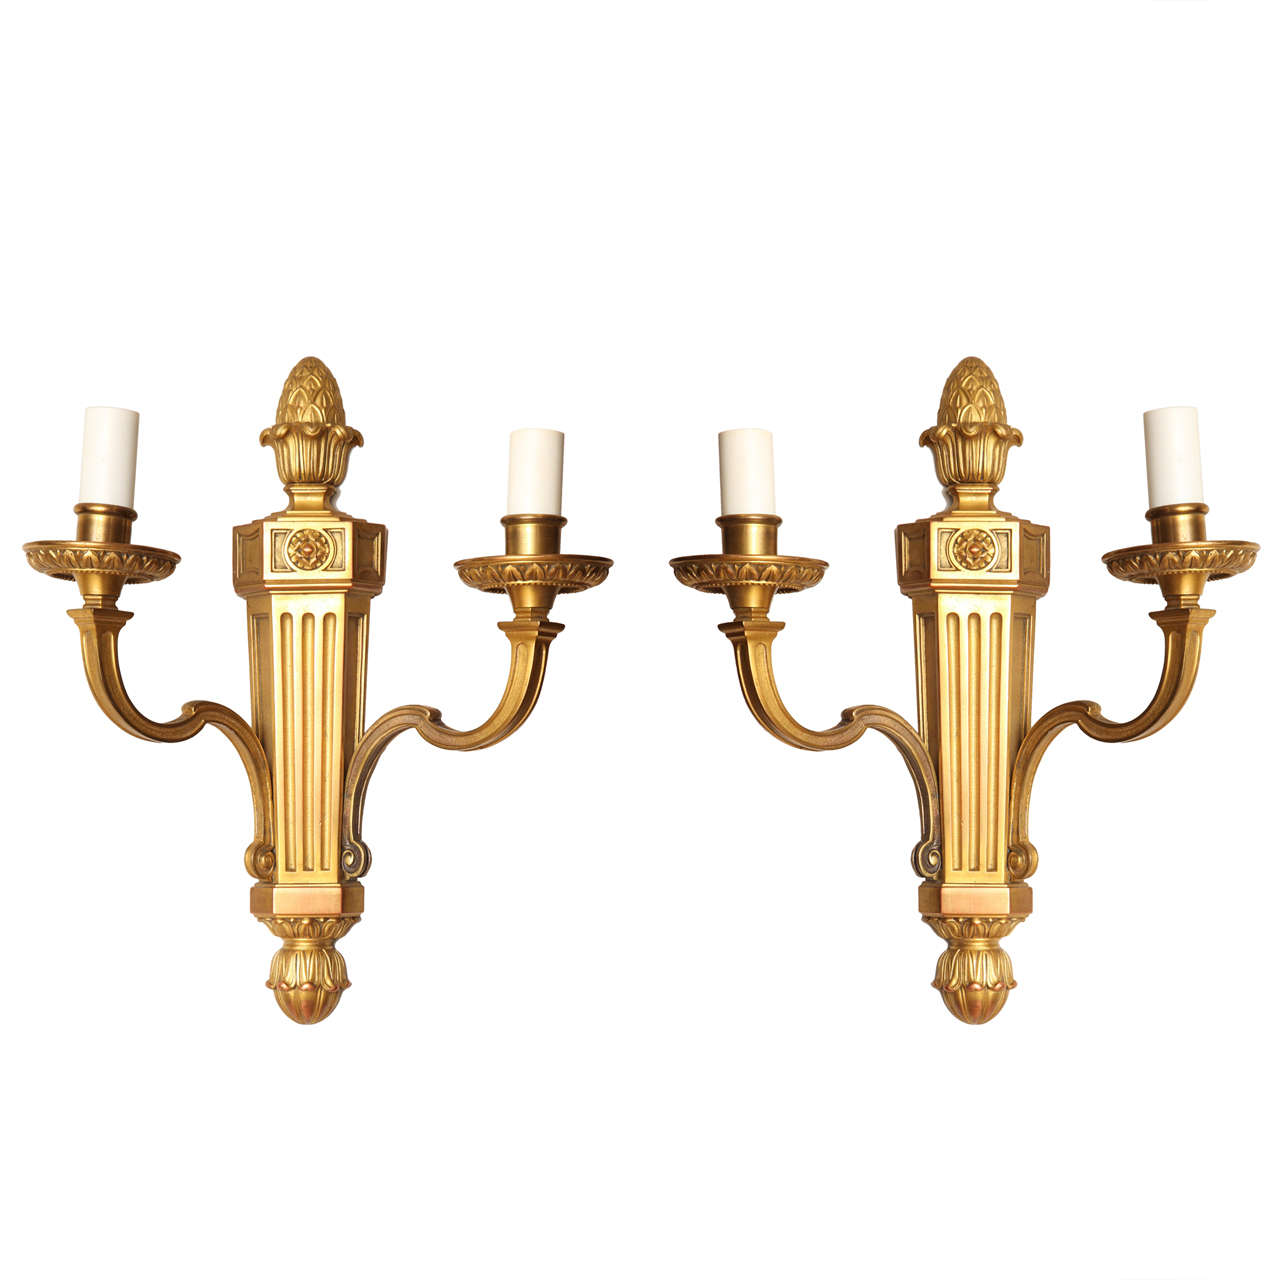 Pair of Louis XVI Two-Light Wall Sconces Attributed to Caldwell